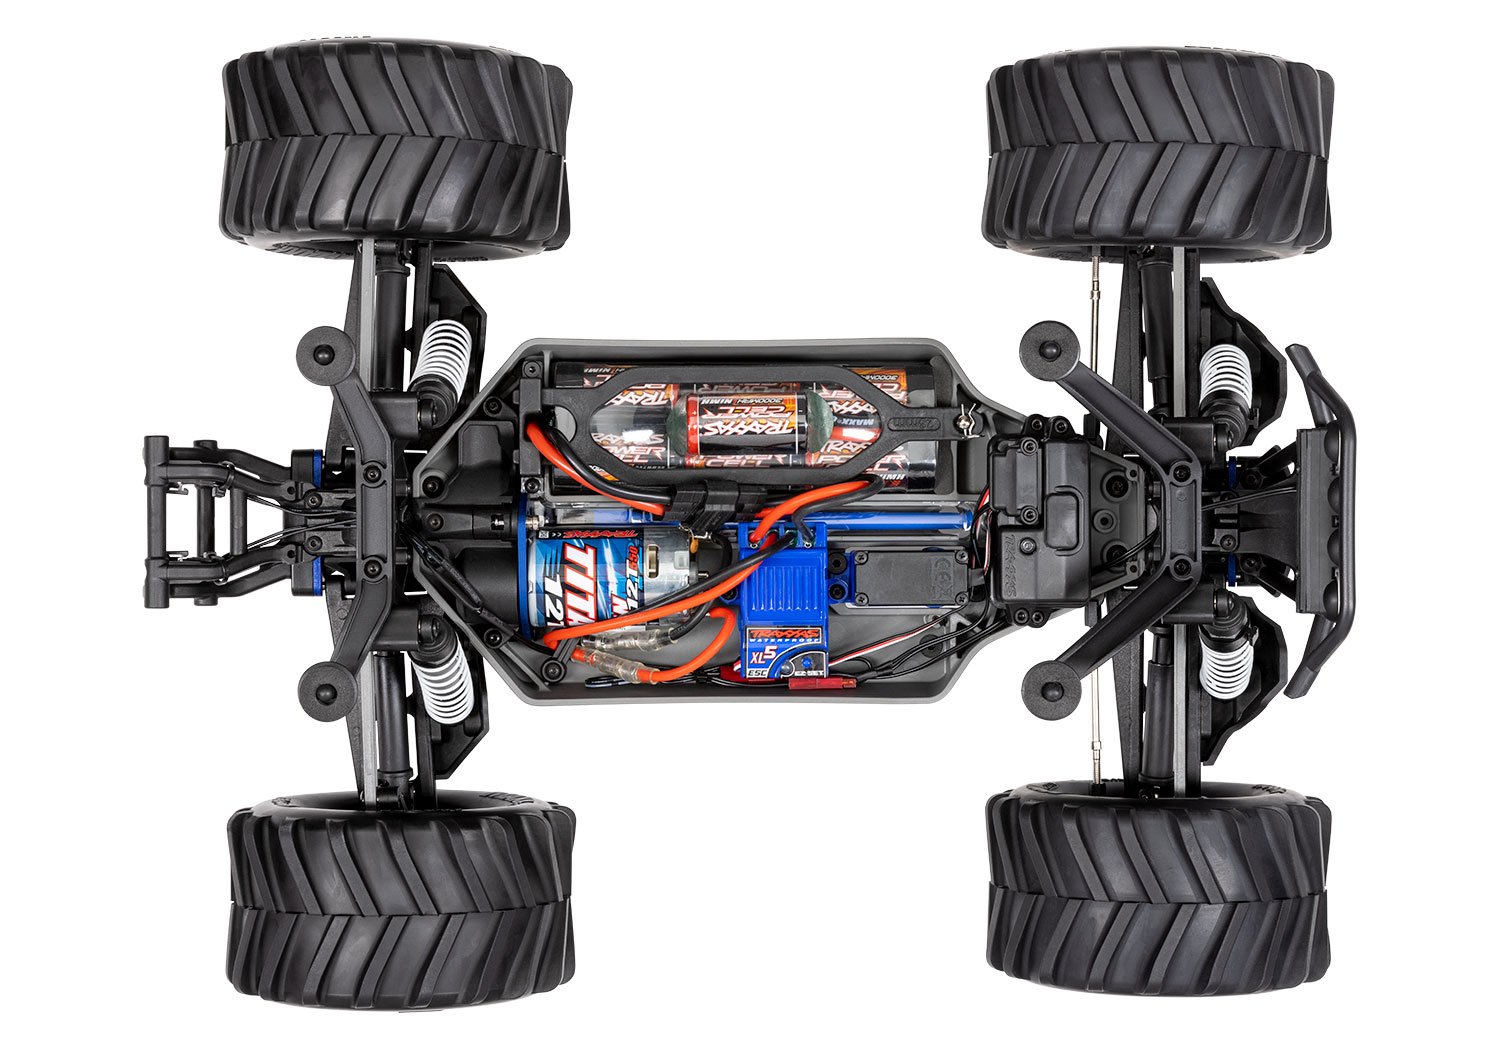 Chassis Optimised for Monster Fun